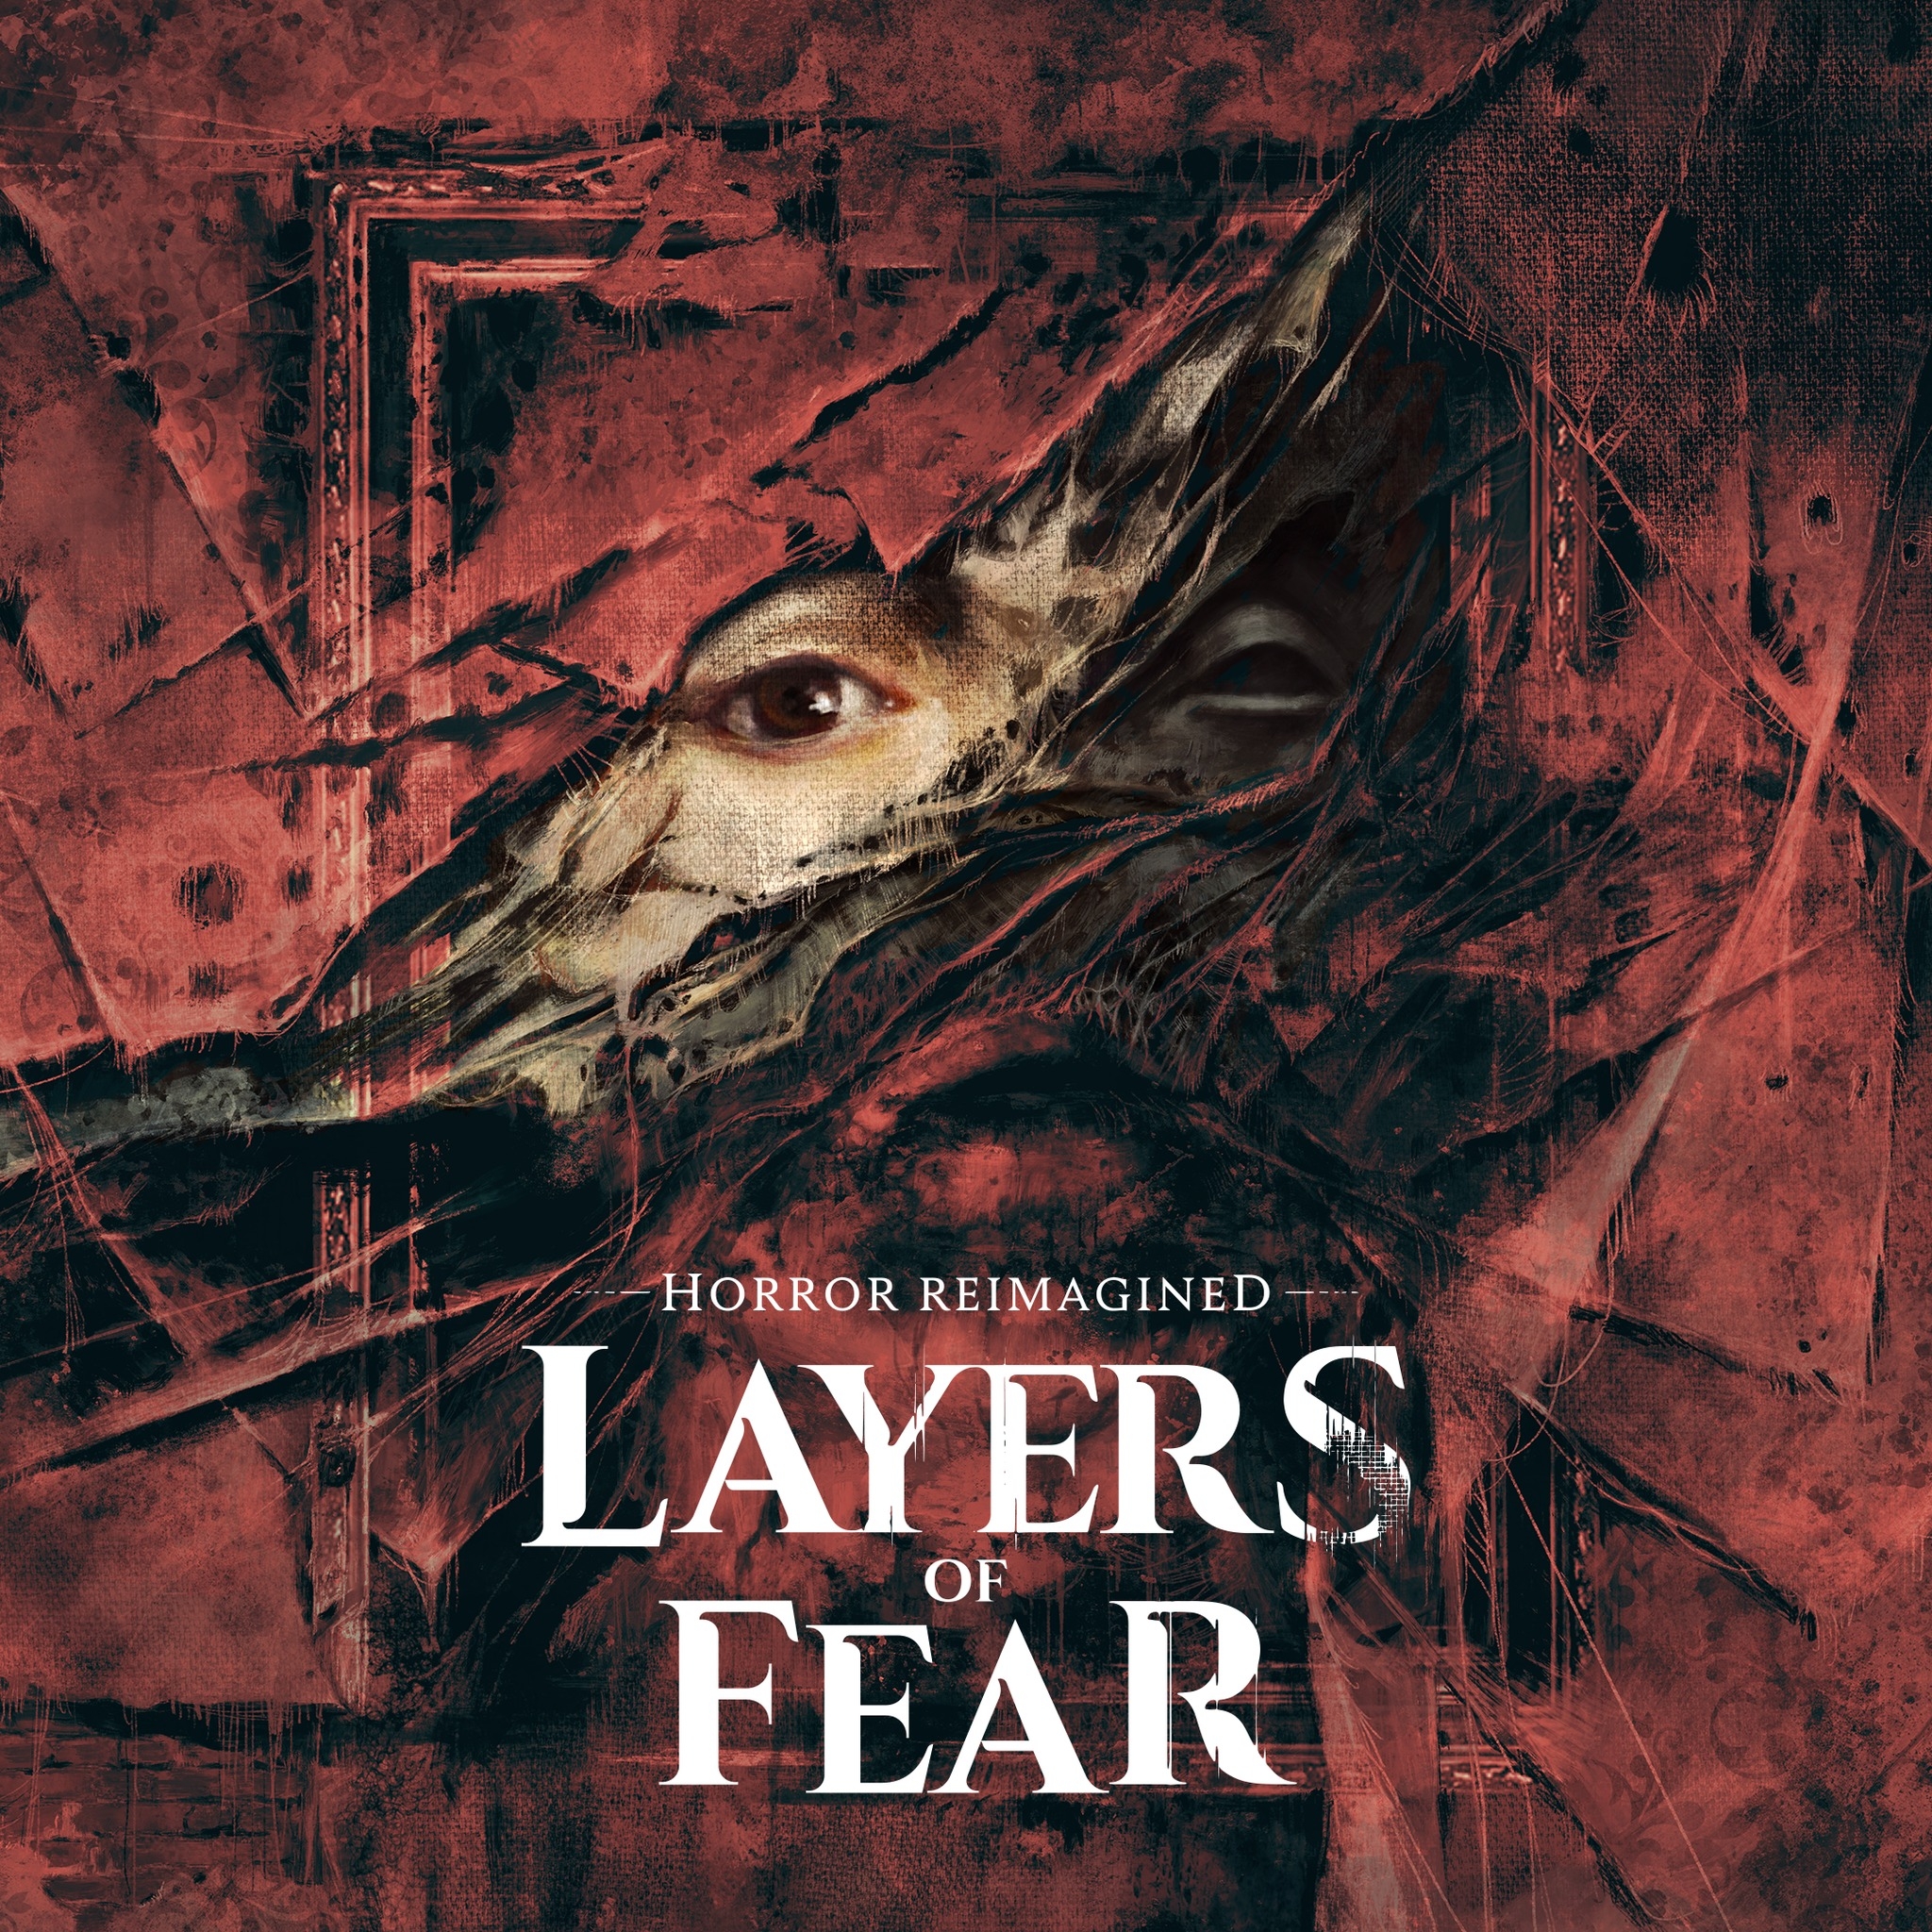 The Actor, Layersoffear Wikia